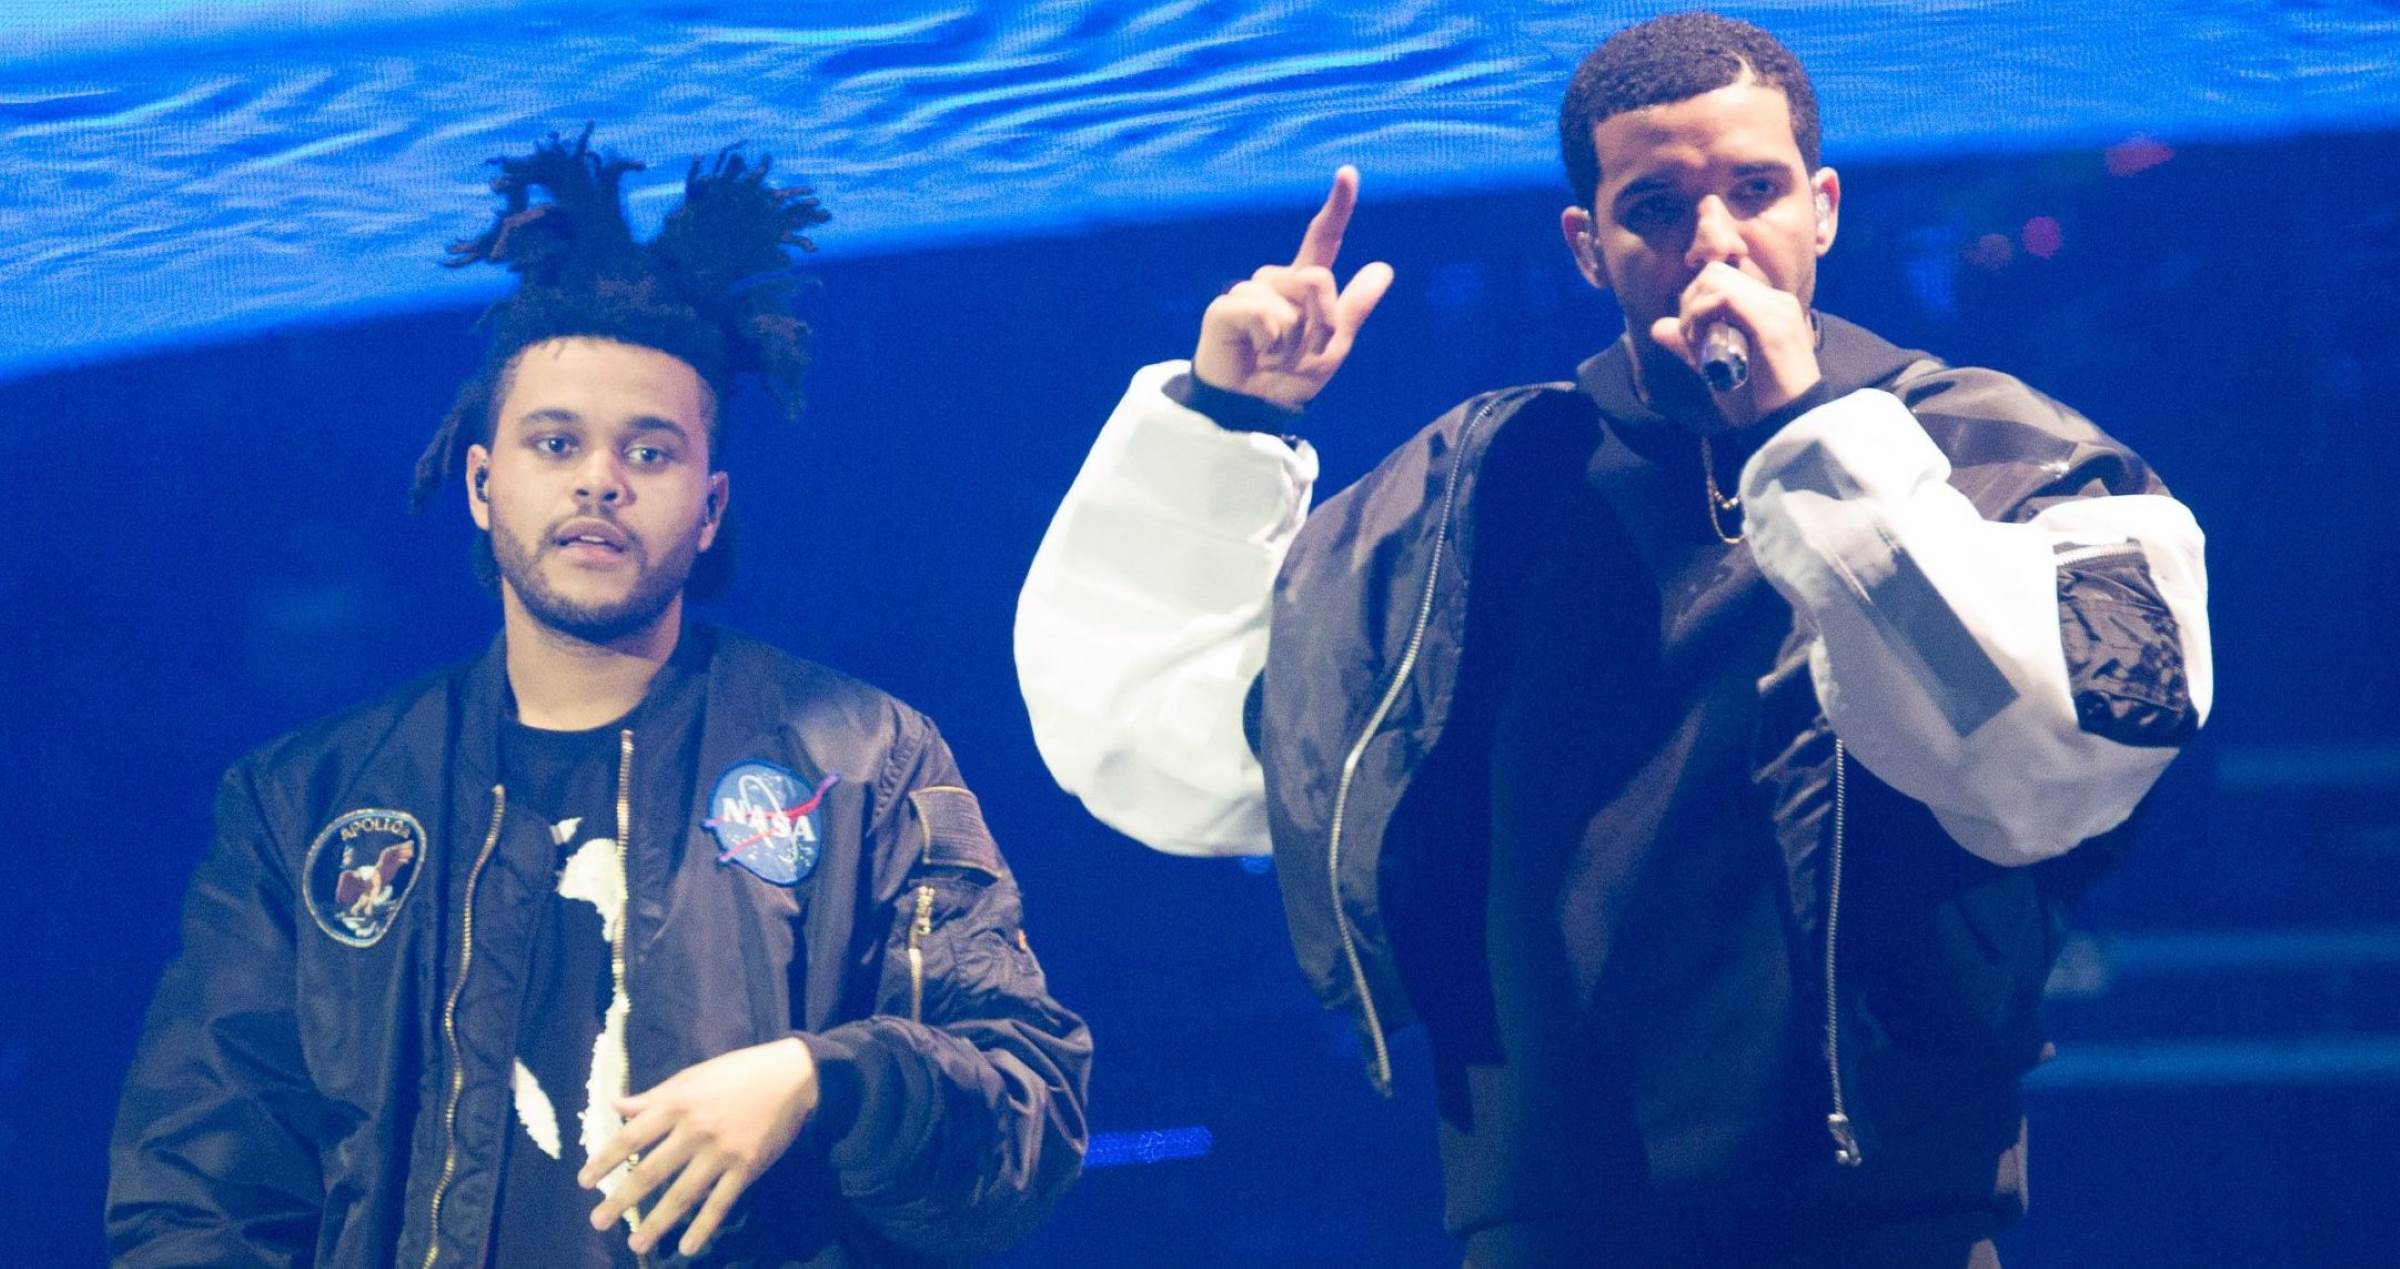 Grammy Eligibility: AI Drake And The Weeknd Collab Could Score A Win, Says Recording Academy CEO